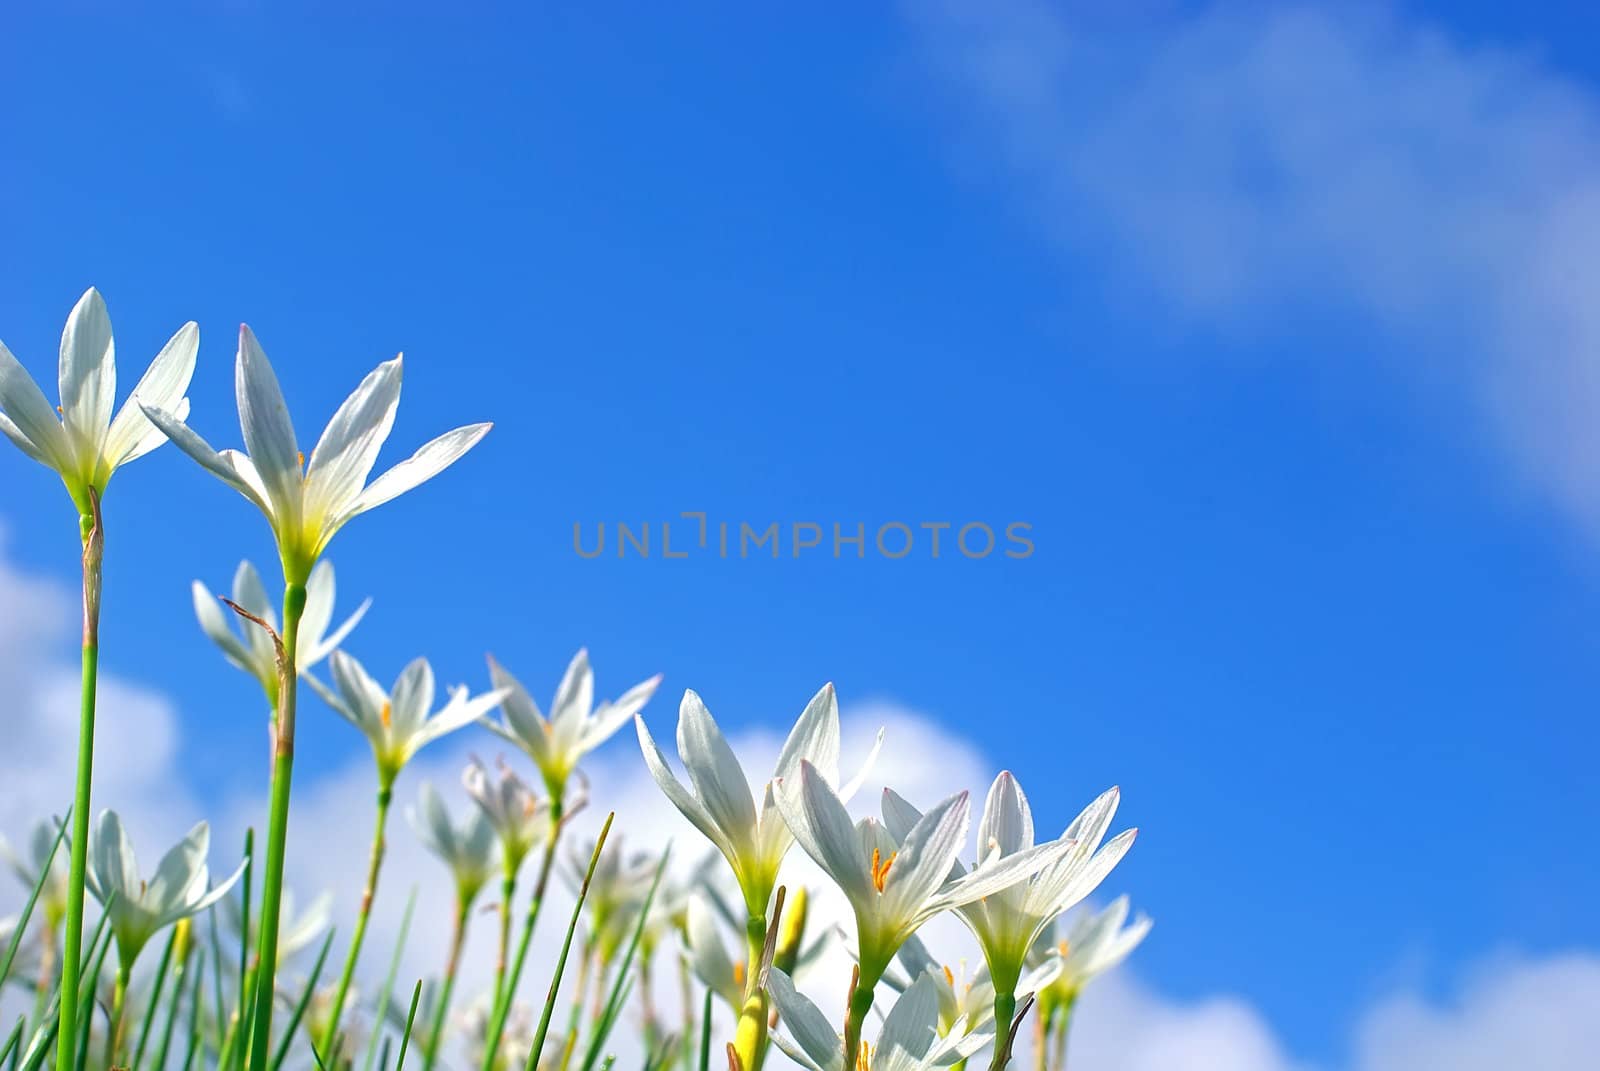 Leek orchid and blue sky by xfdly5